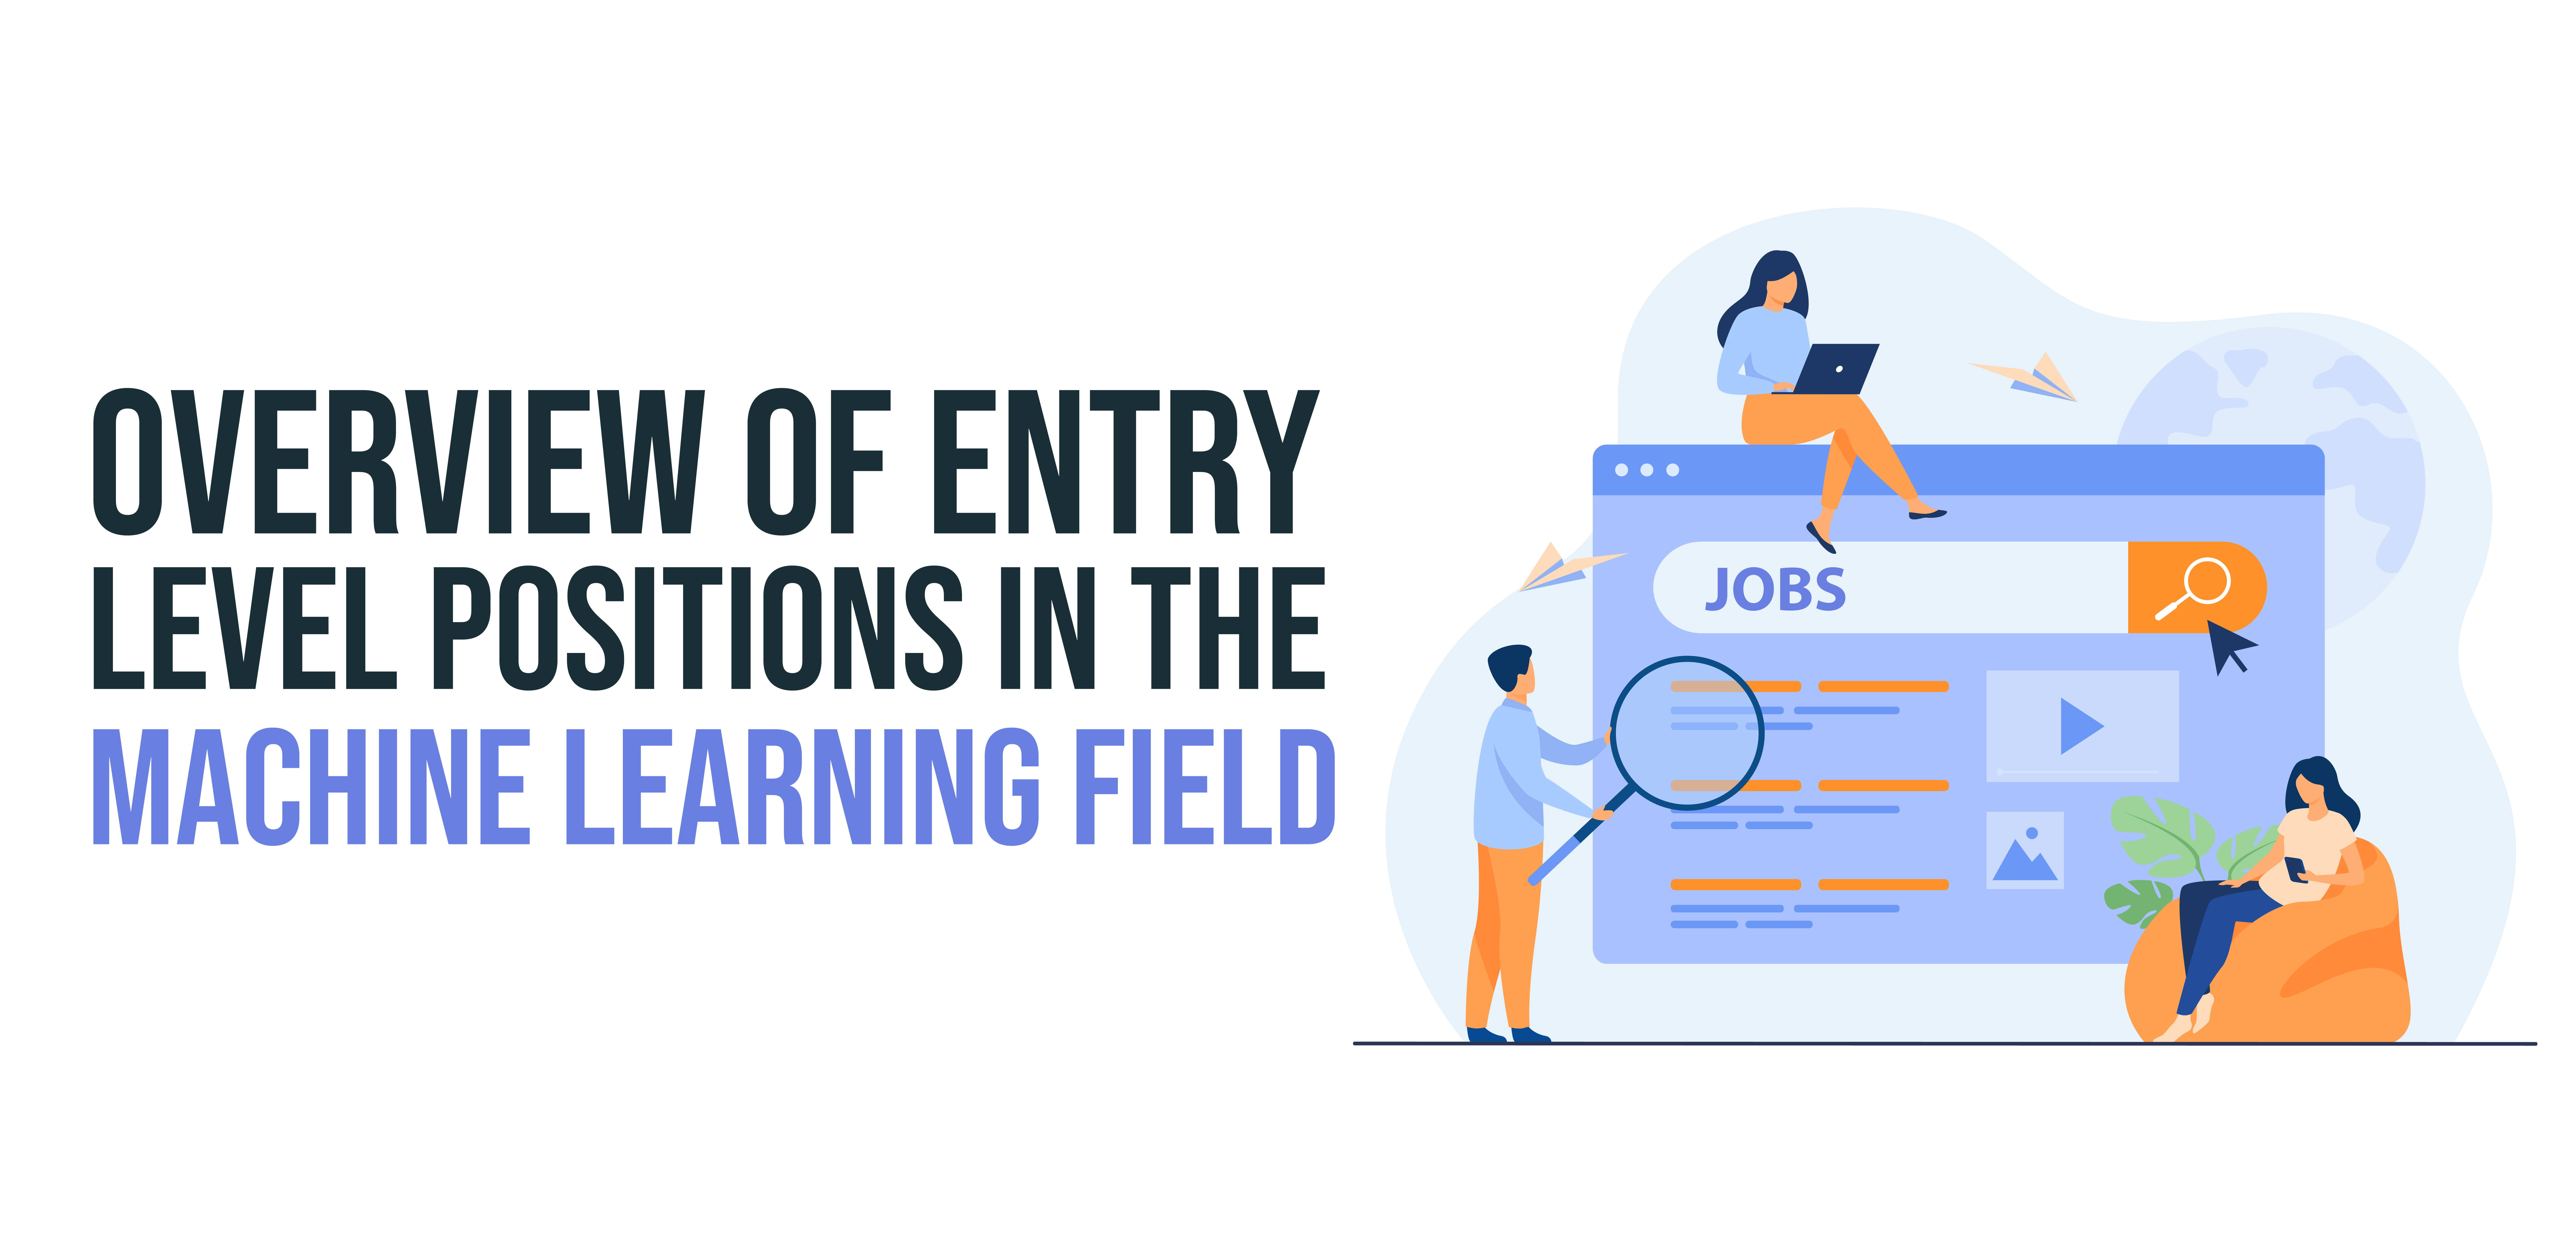 Overview - Entry Level Positions In Machine Learning Field